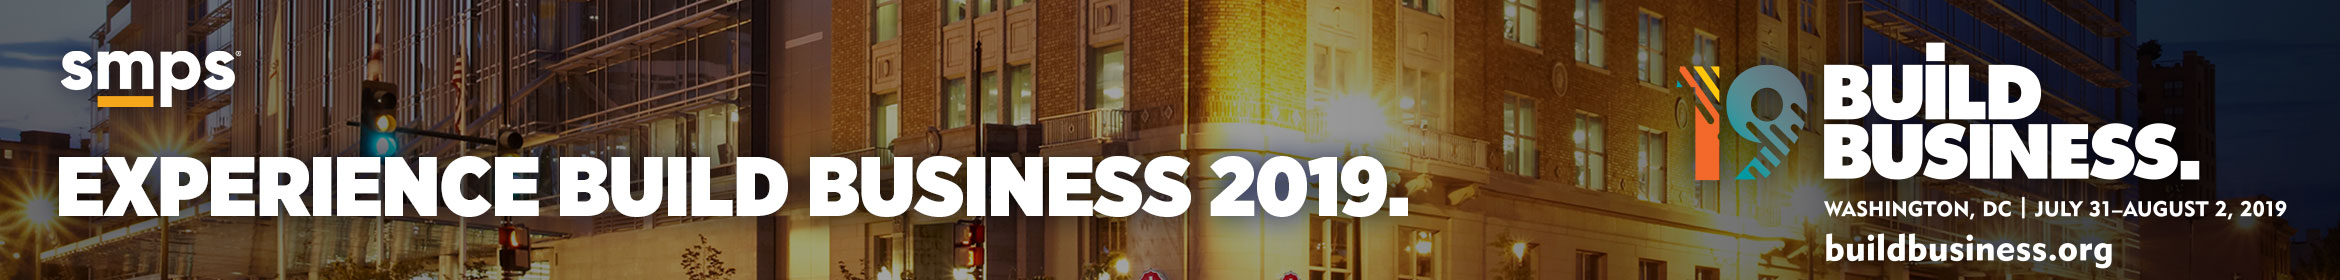 SMPS Build Business 2019 Main banner